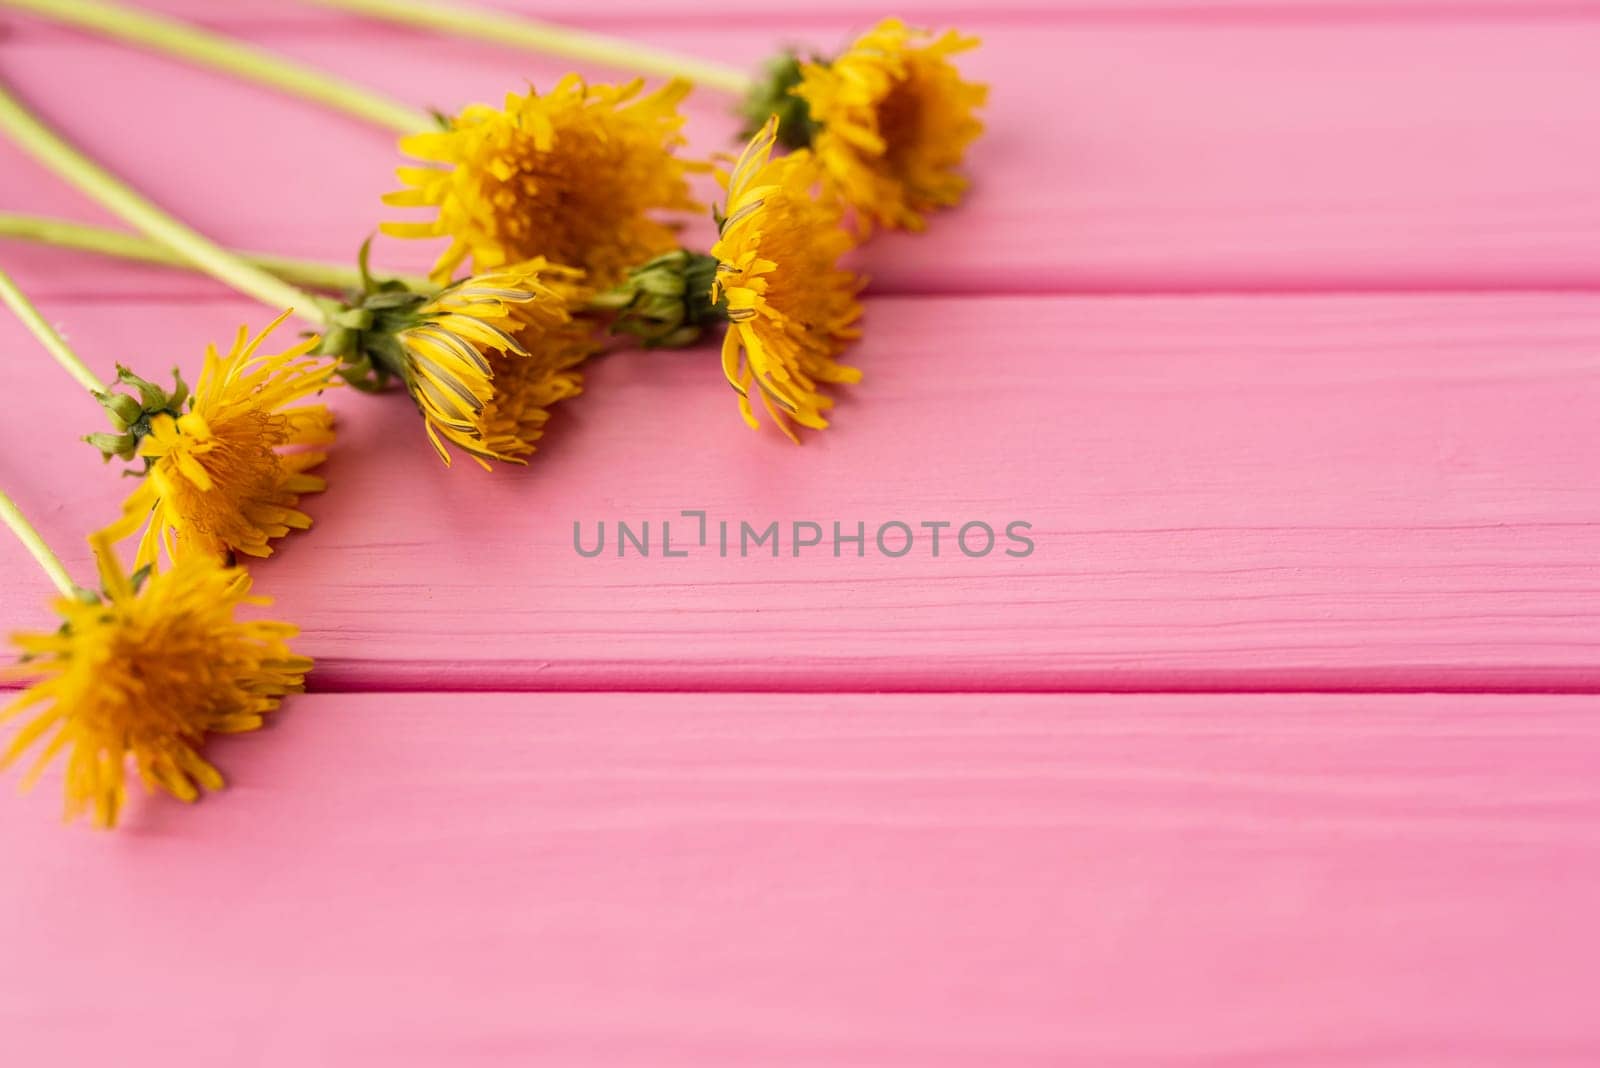 Summer abstract background mockup flowers borders frames yellow dandelions by AndriiDrachuk